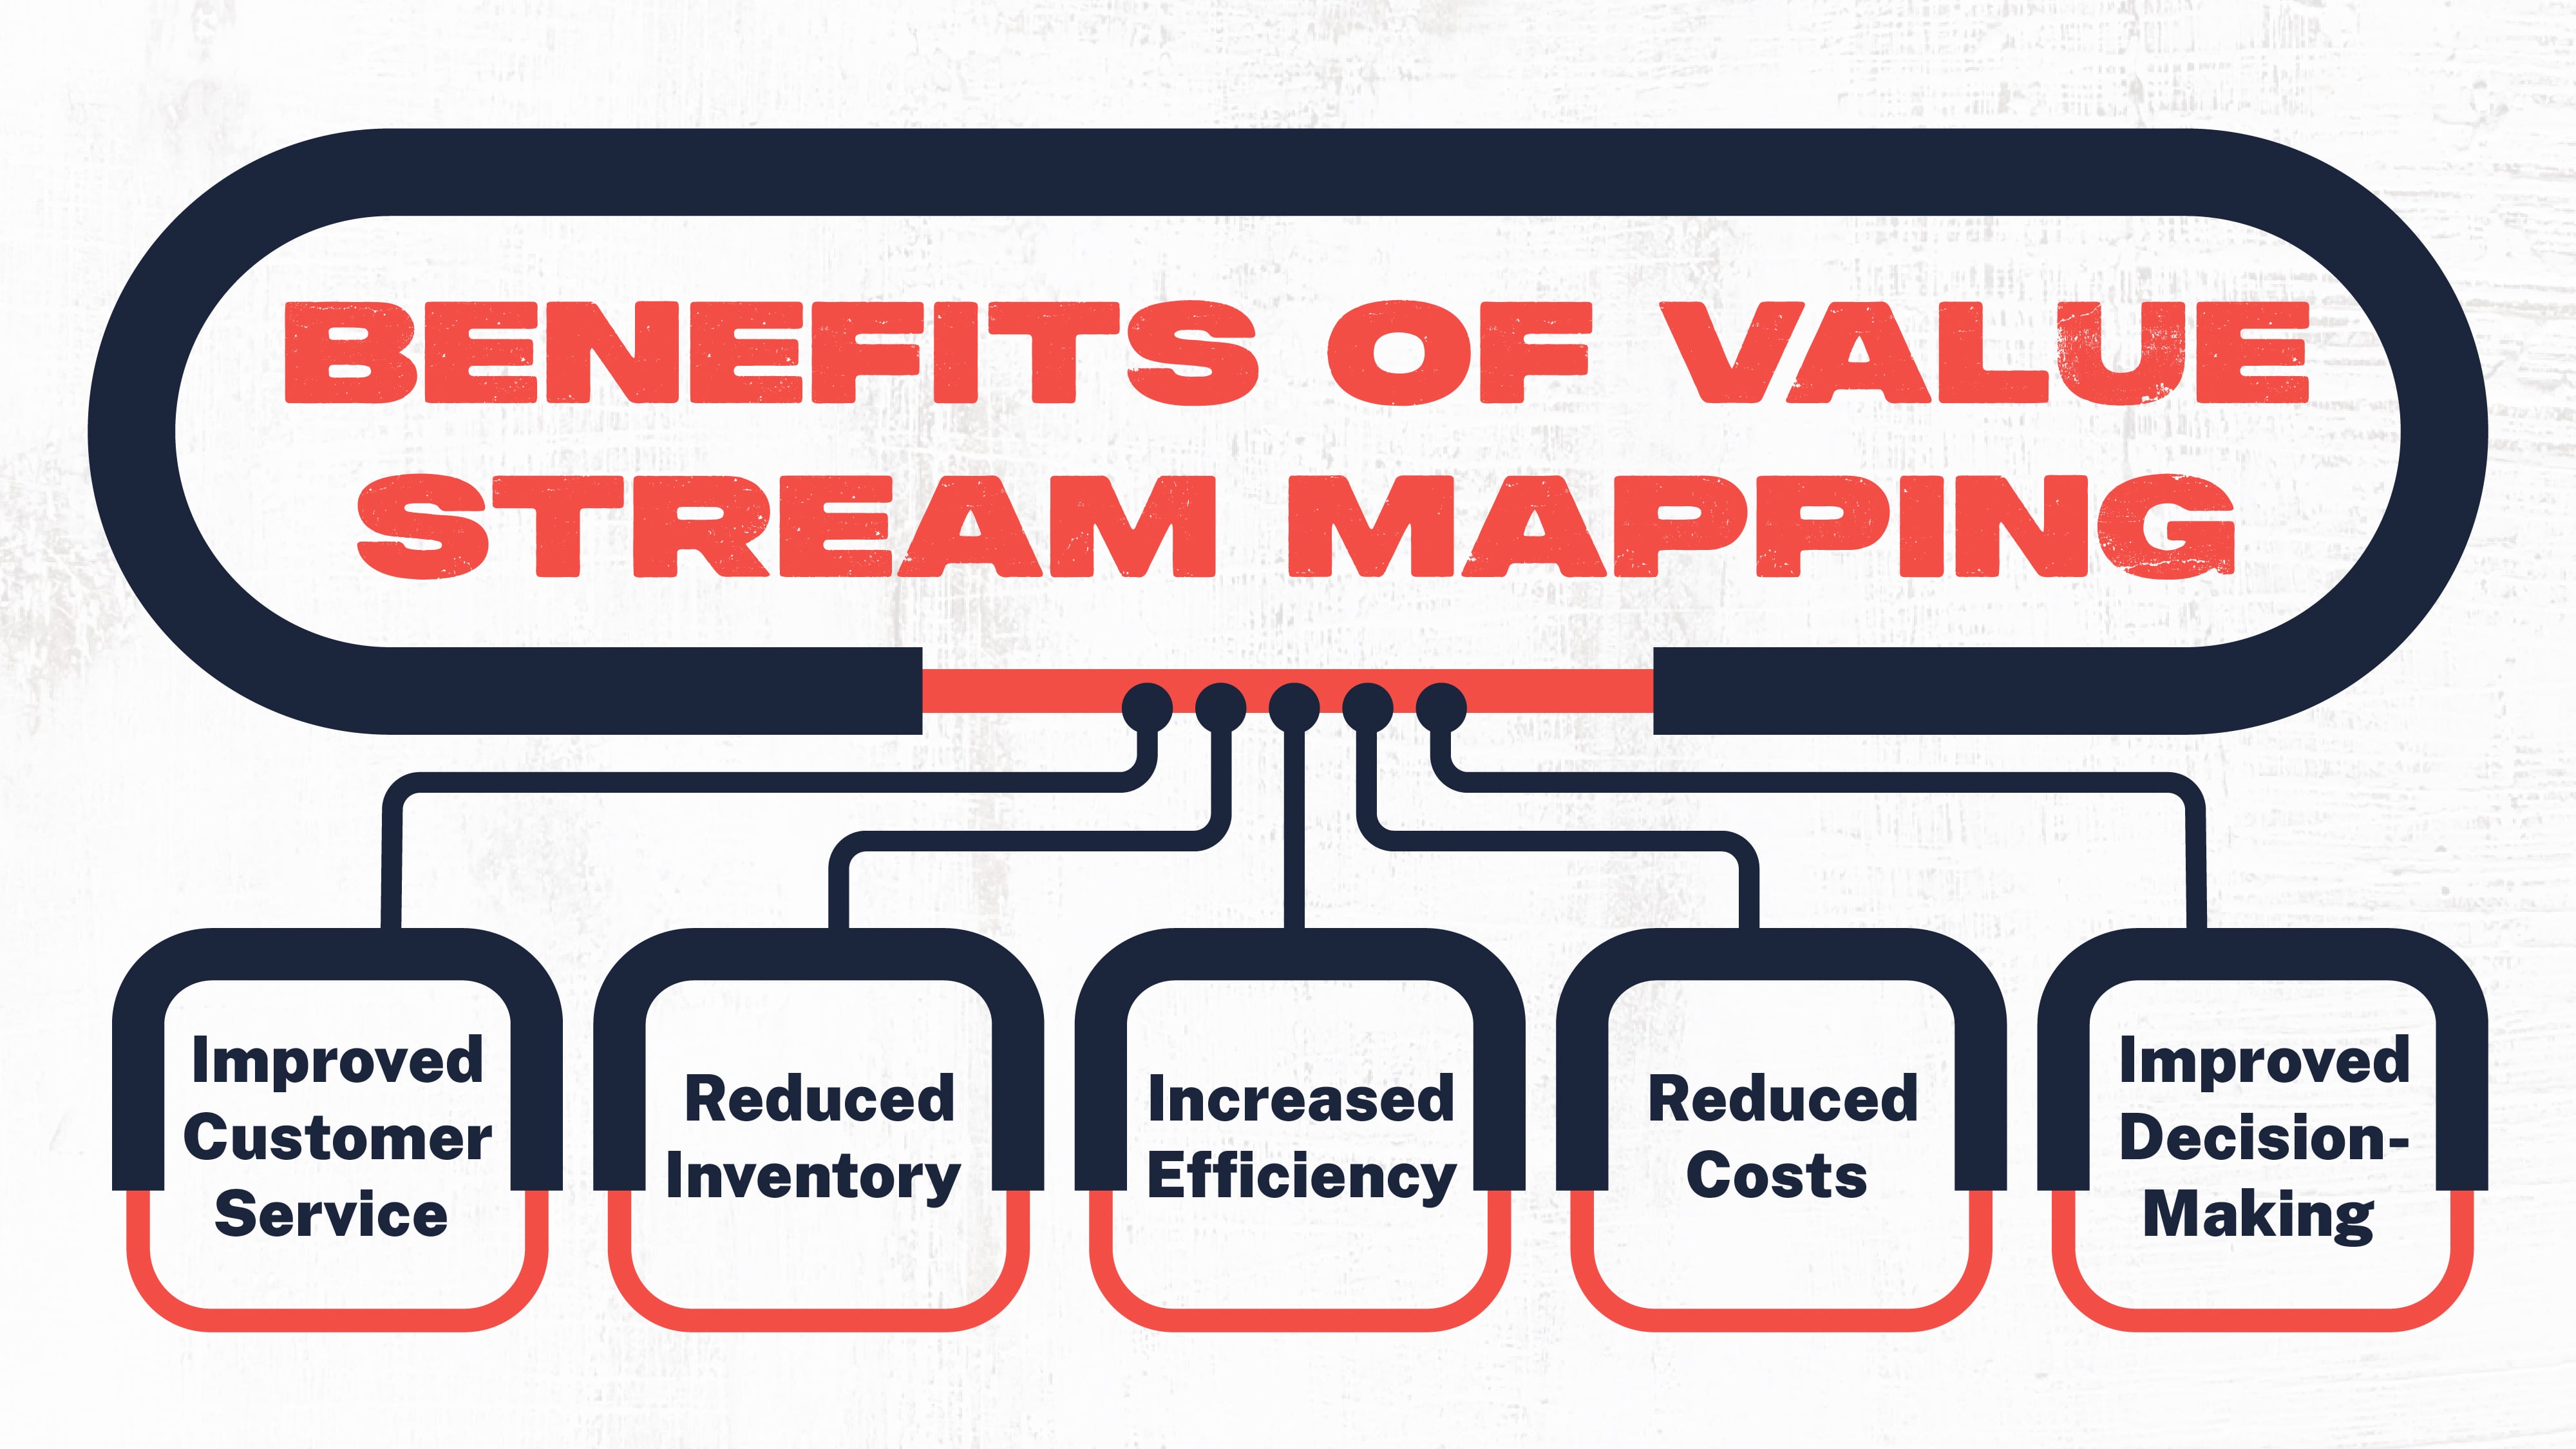 Benefits of Value Stream Mapping